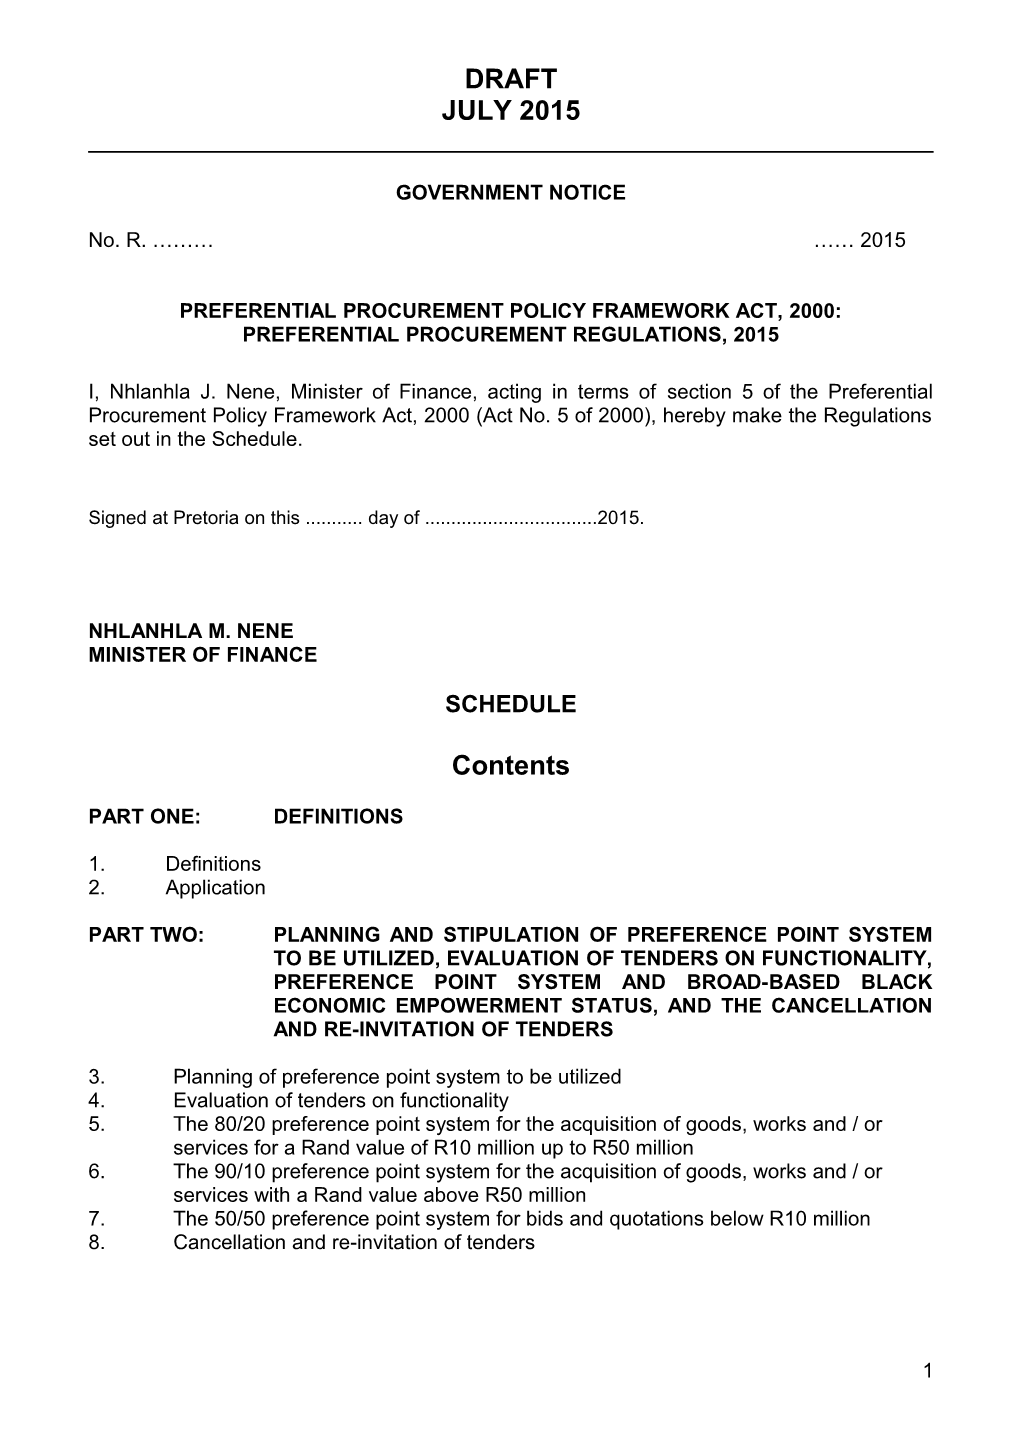 Preferential Procurement Regulations, 2008 Pertaining to the Preferential Procurement Policy